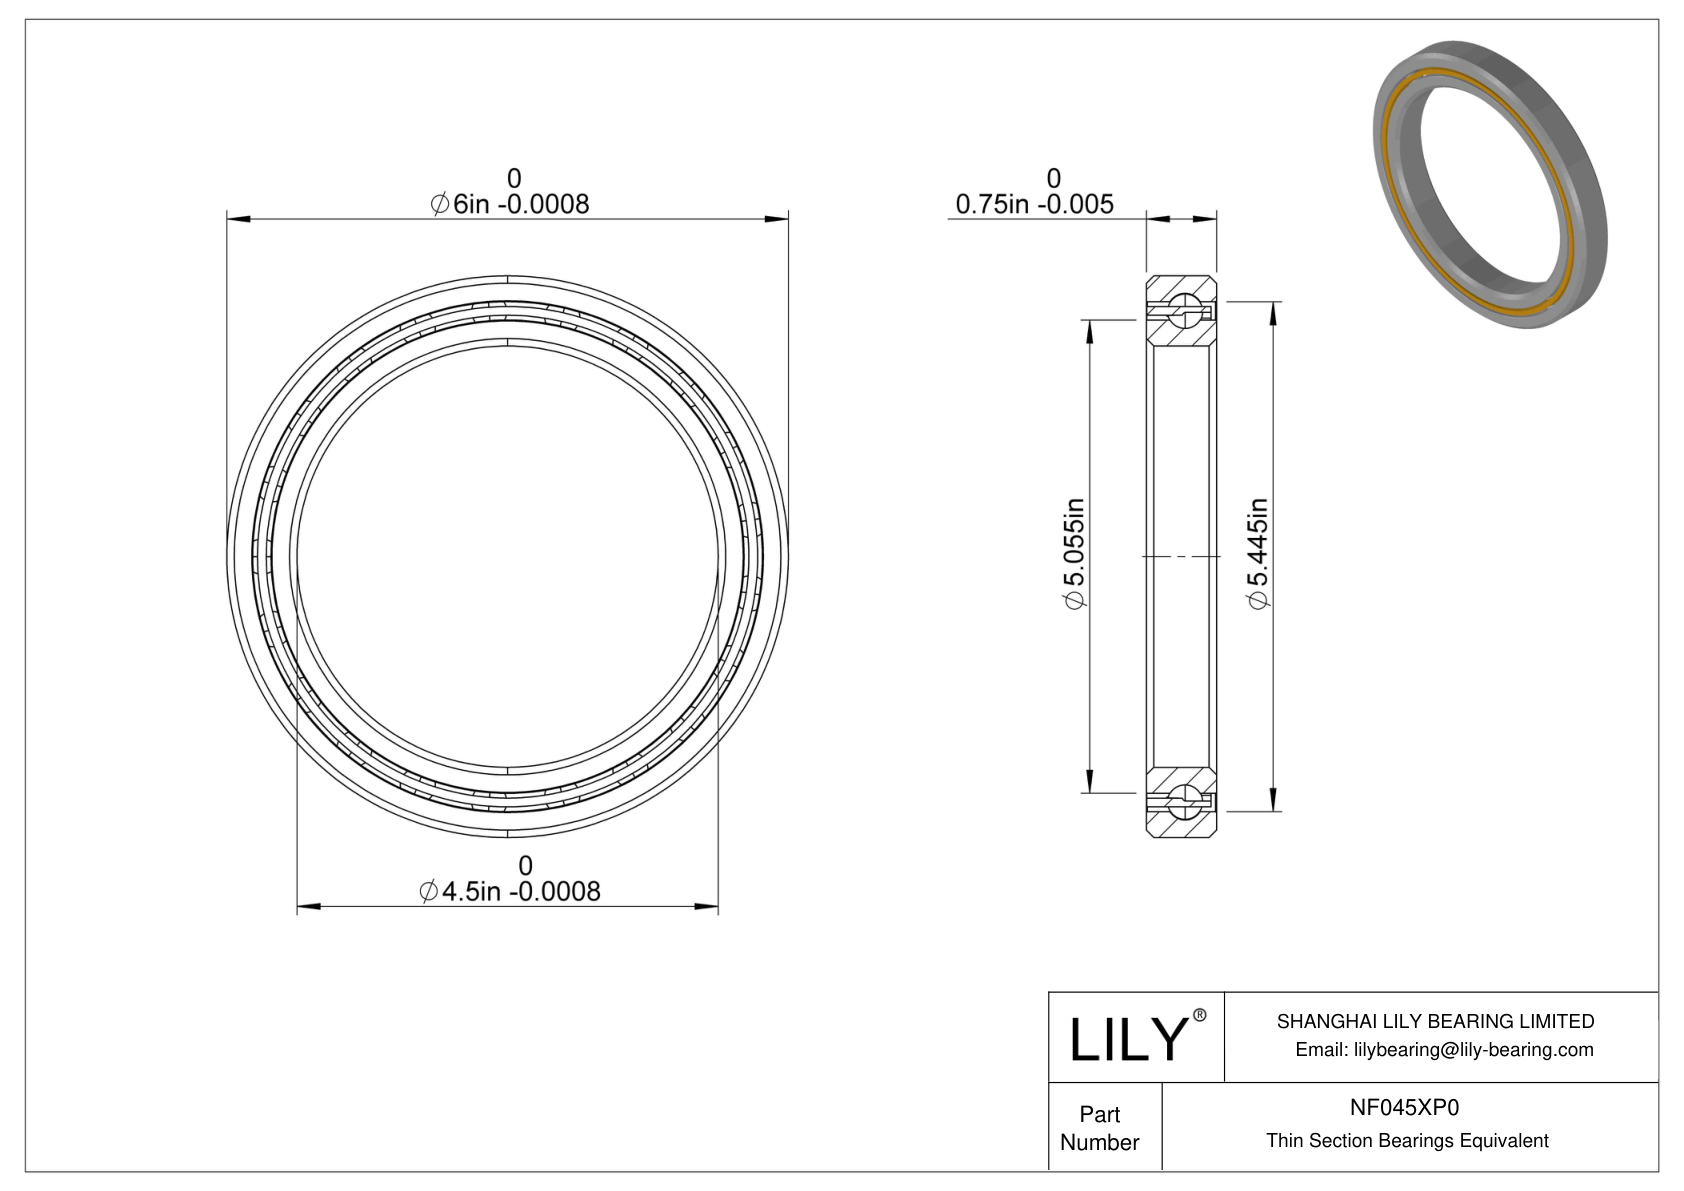 NF045XP0 Constant Section (CS) Bearings CAD图形